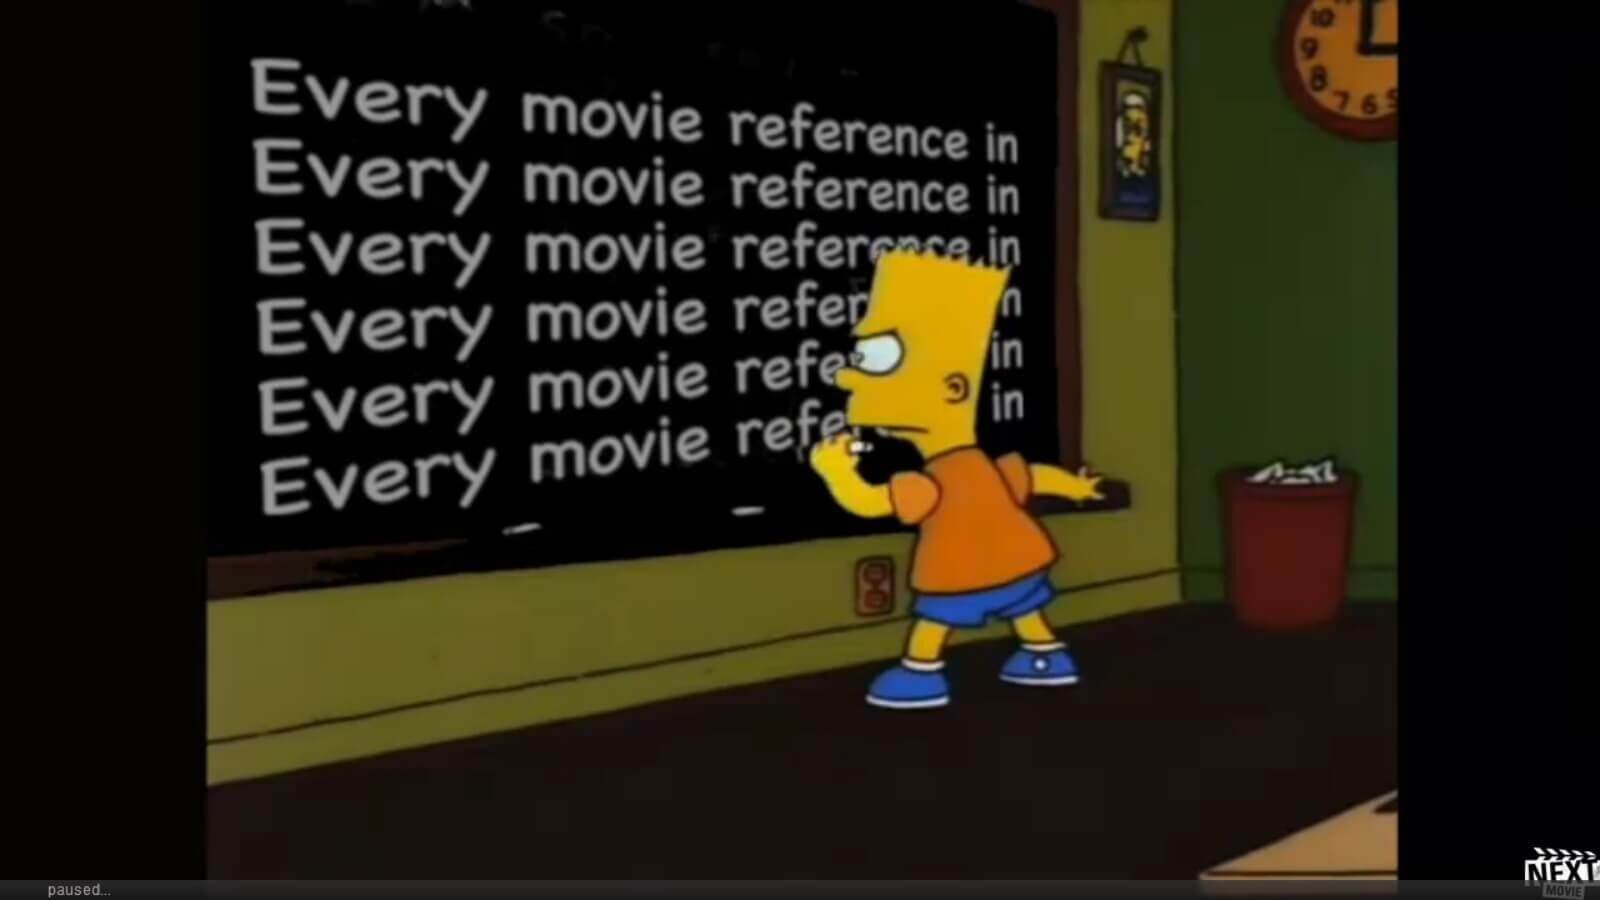 Must see: The Simpsons movie references